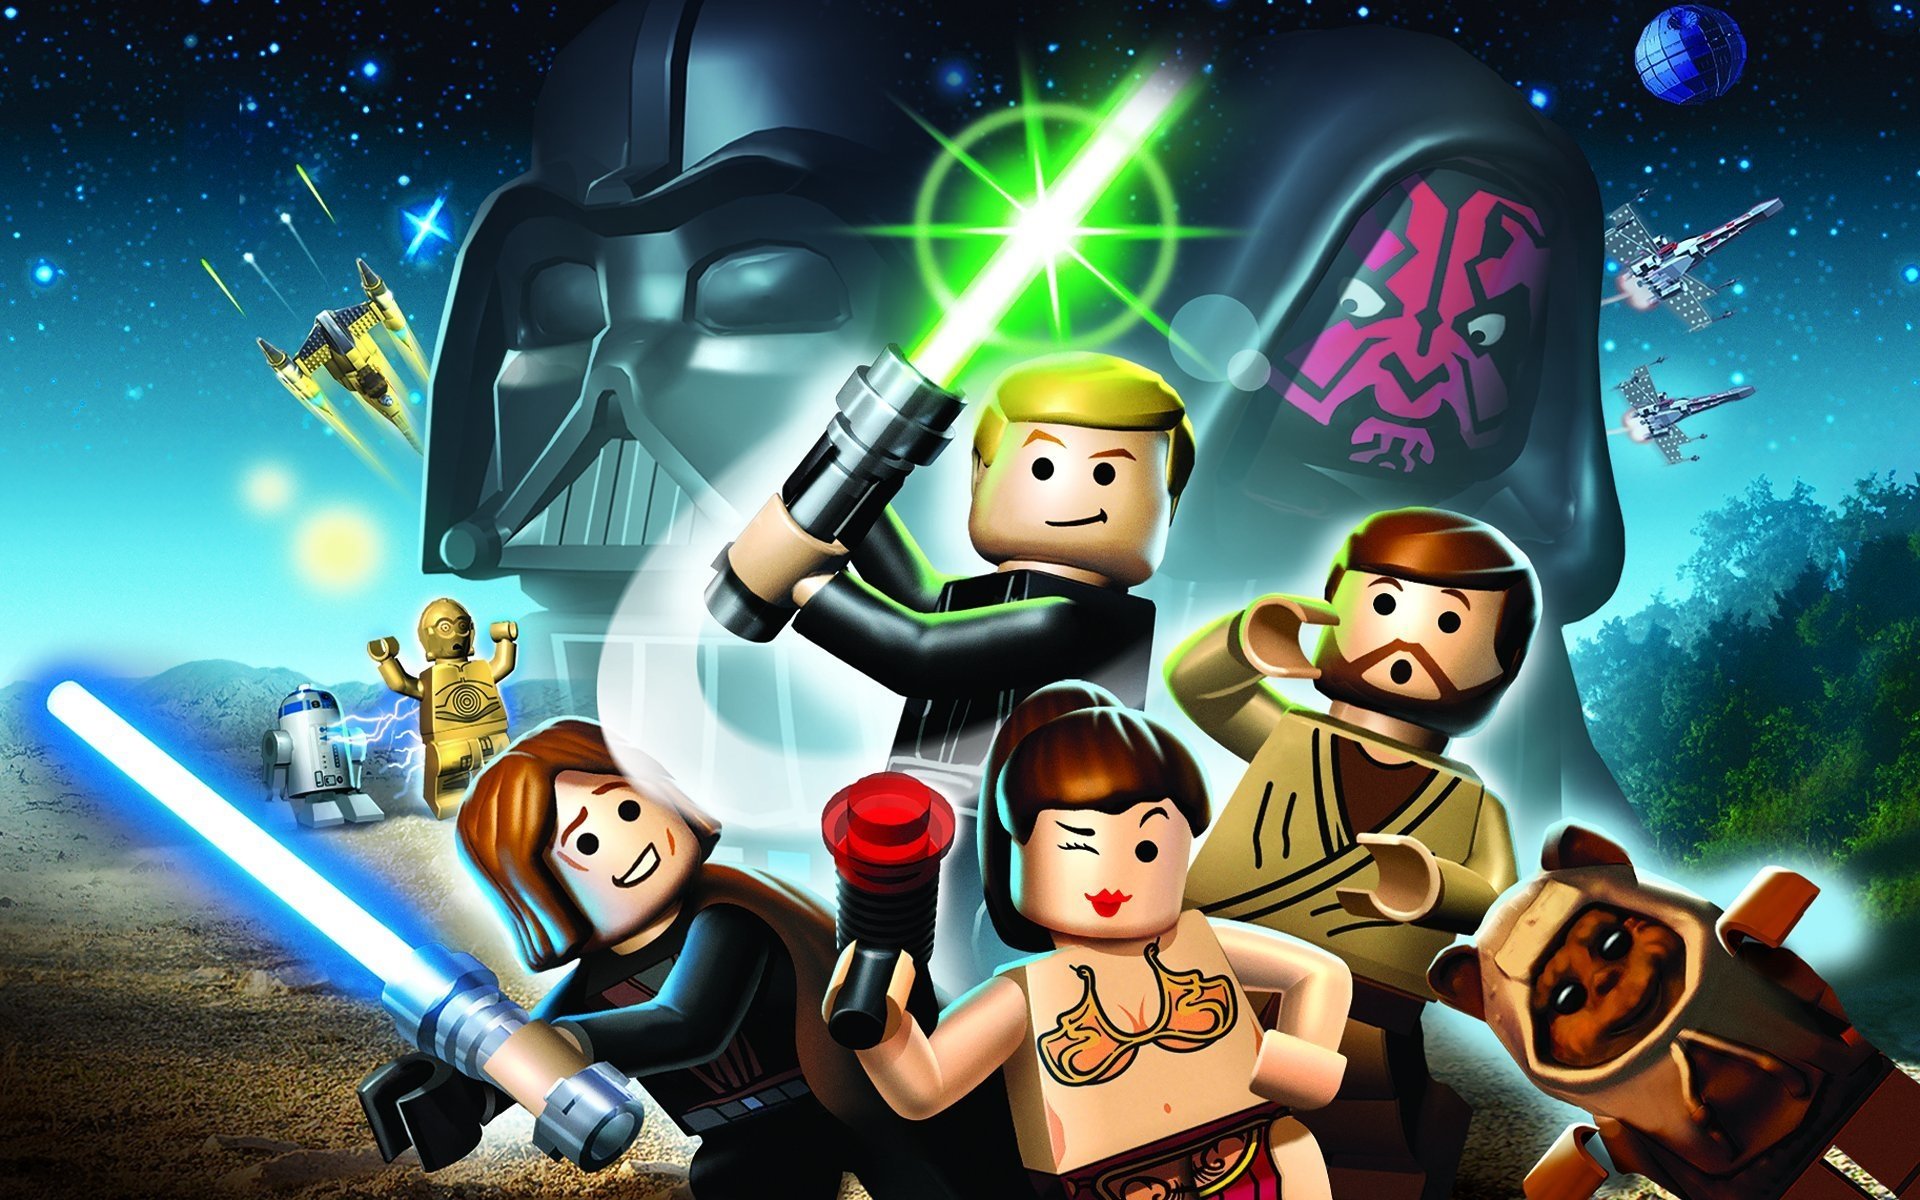 Lego Star Wars The Complete Saga Wallpapers